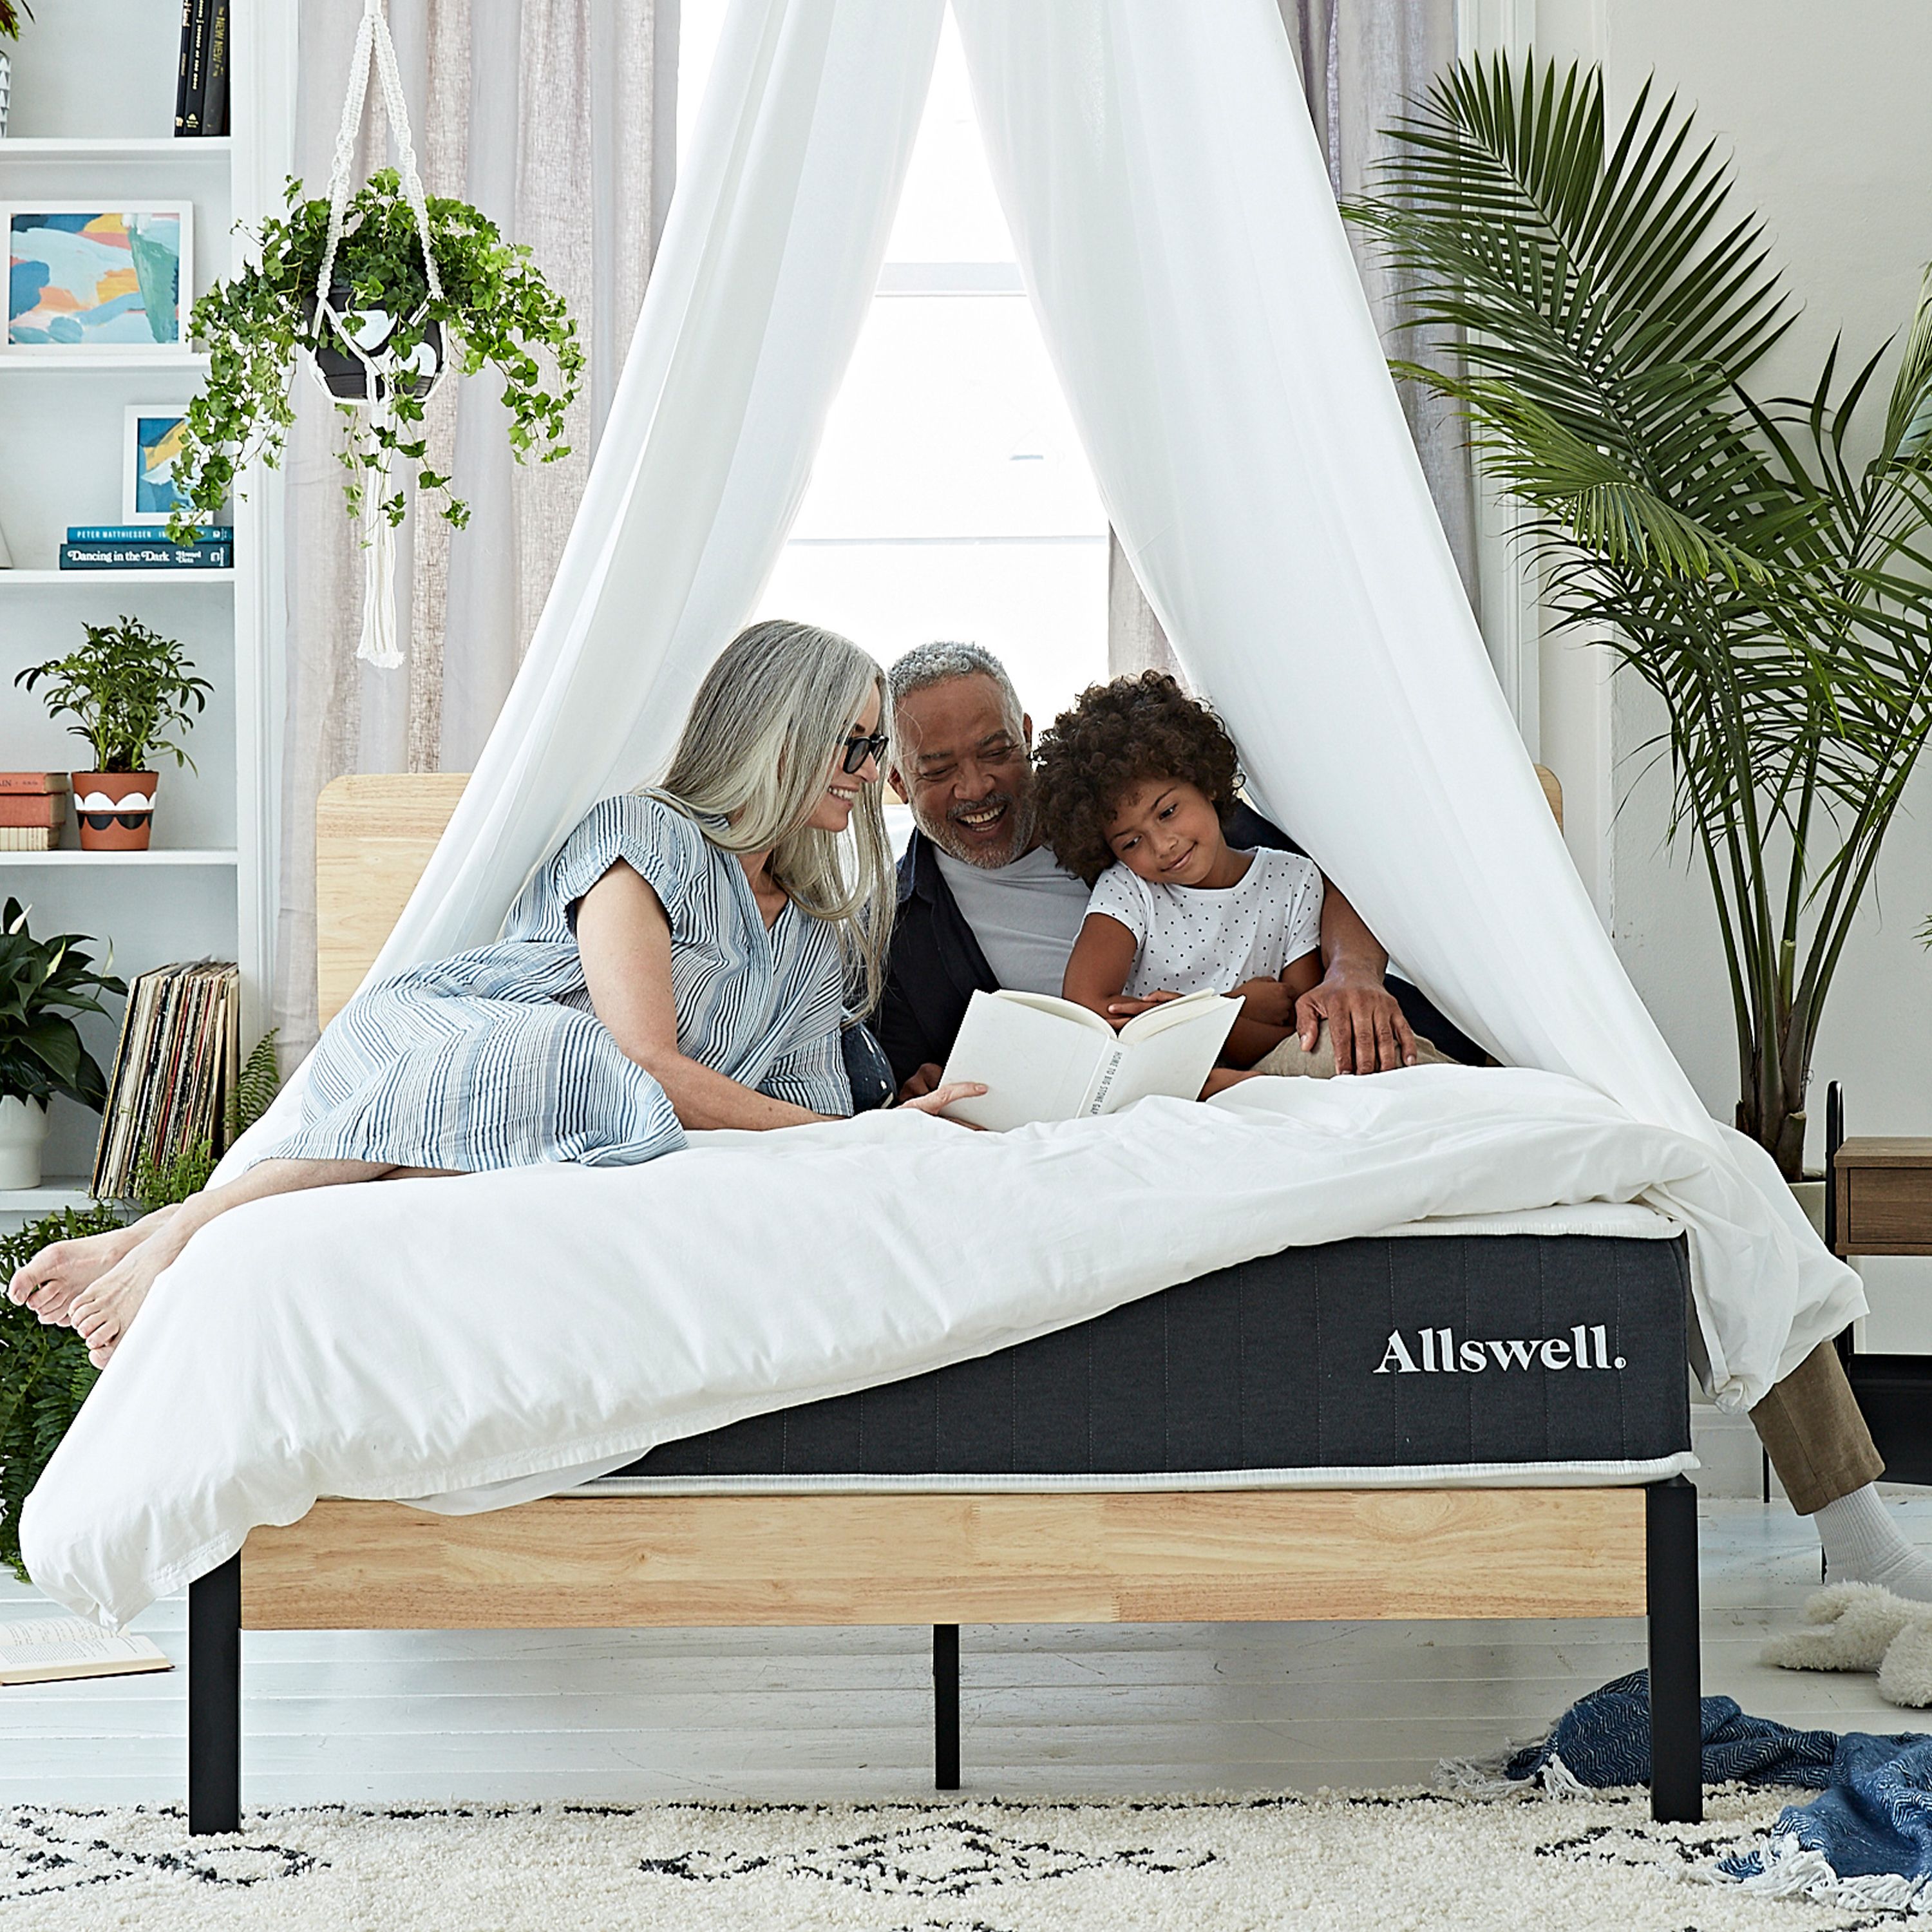 The Original Allswell 10" Bed in a Box Hybrid Mattress, Queen - image 4 of 8